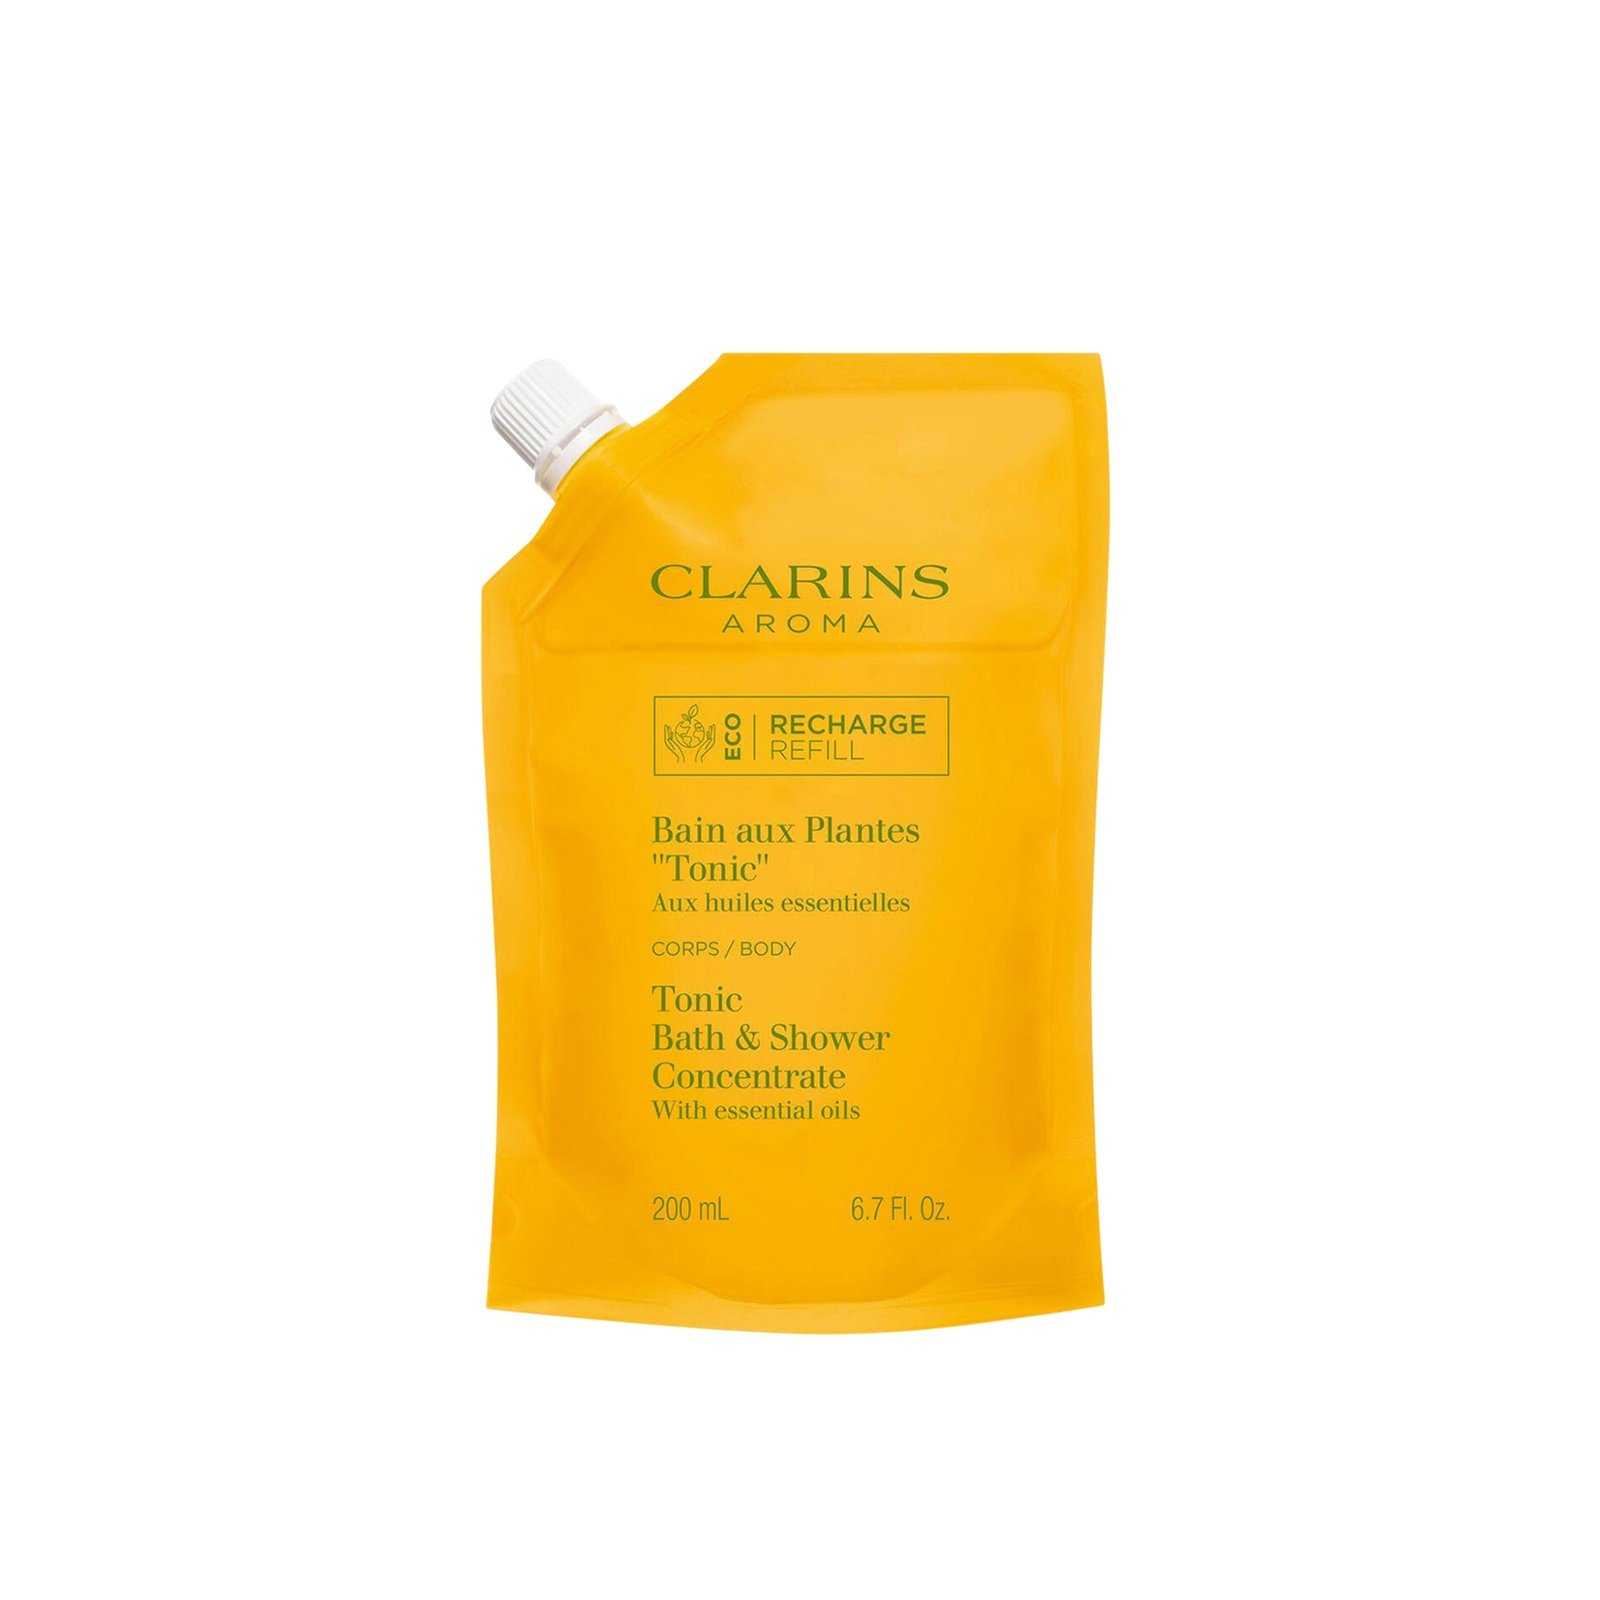 Clarins Aroma Tonic Bath & Shower Concentrate Eco Refill 200ml